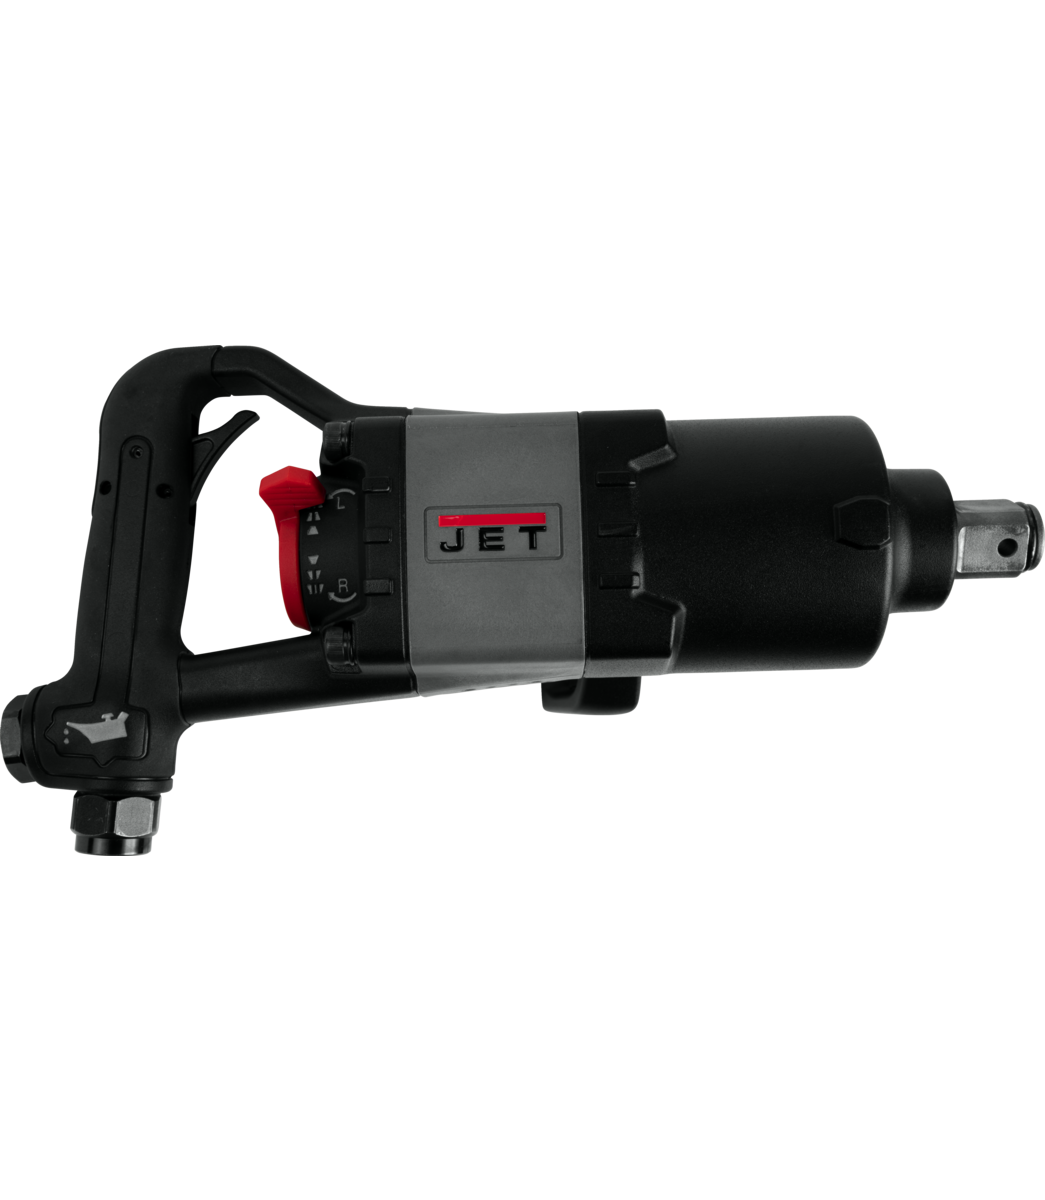 JET 1" D-Handle Impact Wrench